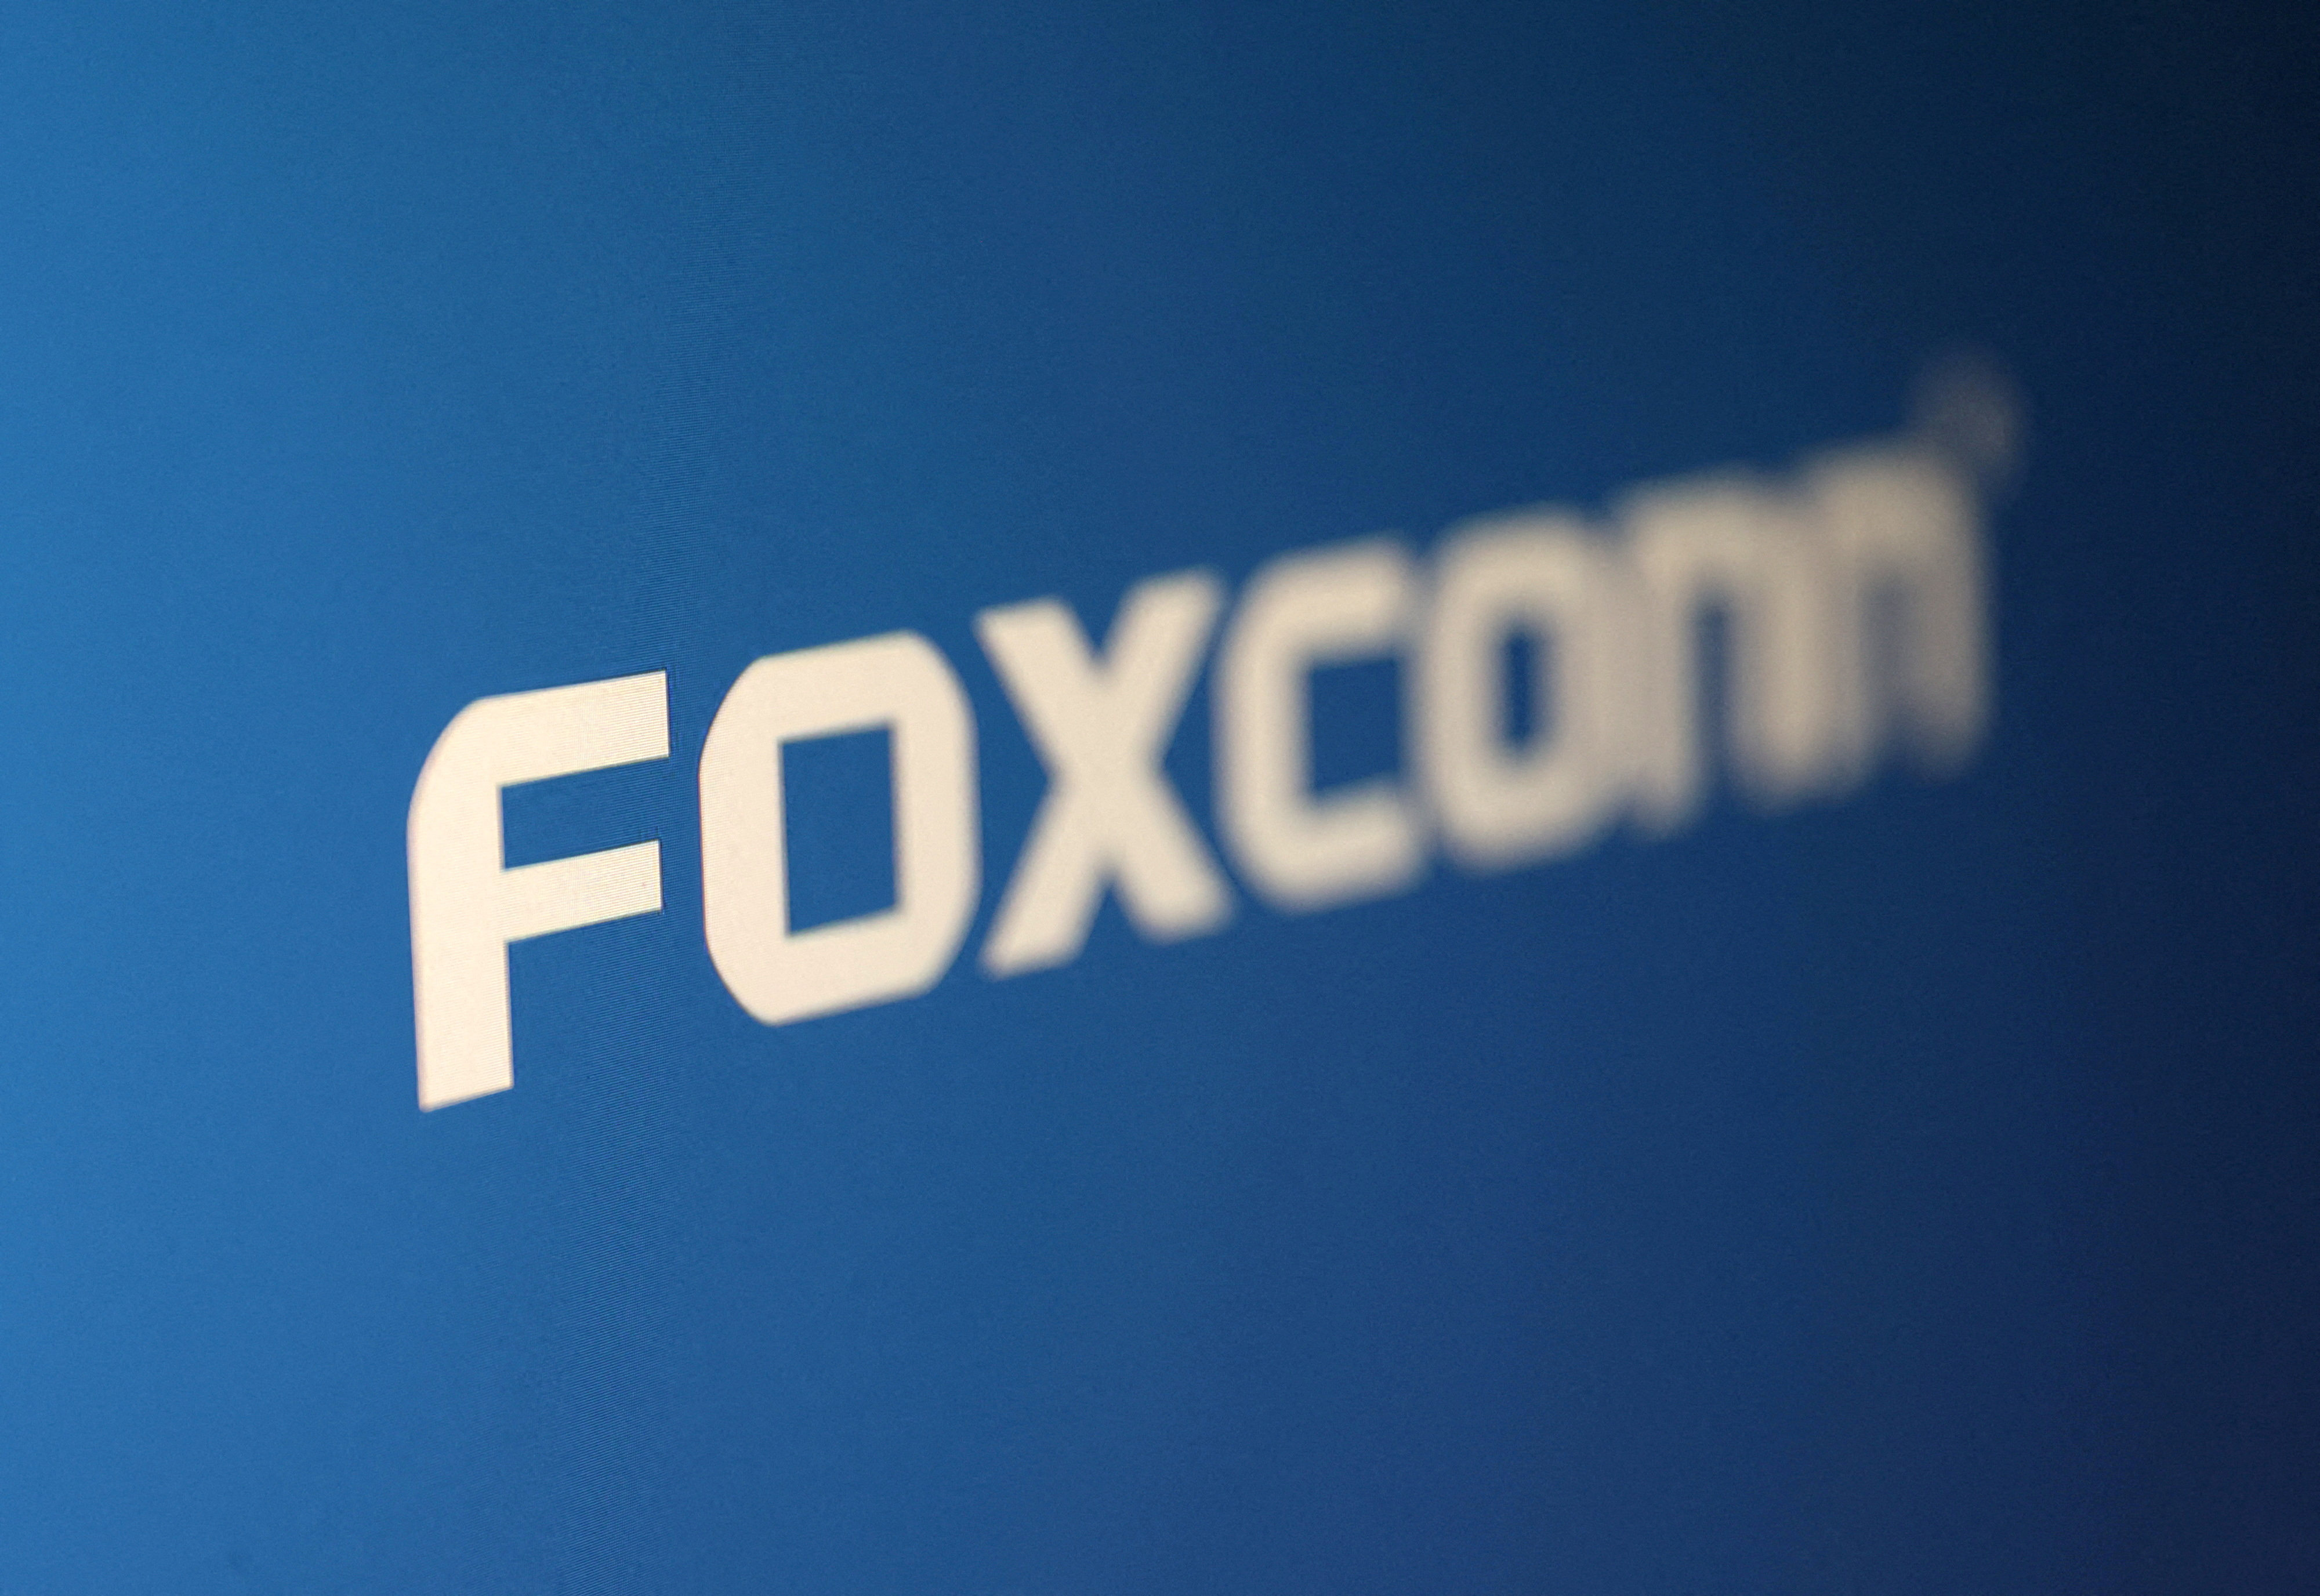 Foxconn has announced plans for two new component plants in India as it seeks to diversify manufacturing from China. Photo: Reuters